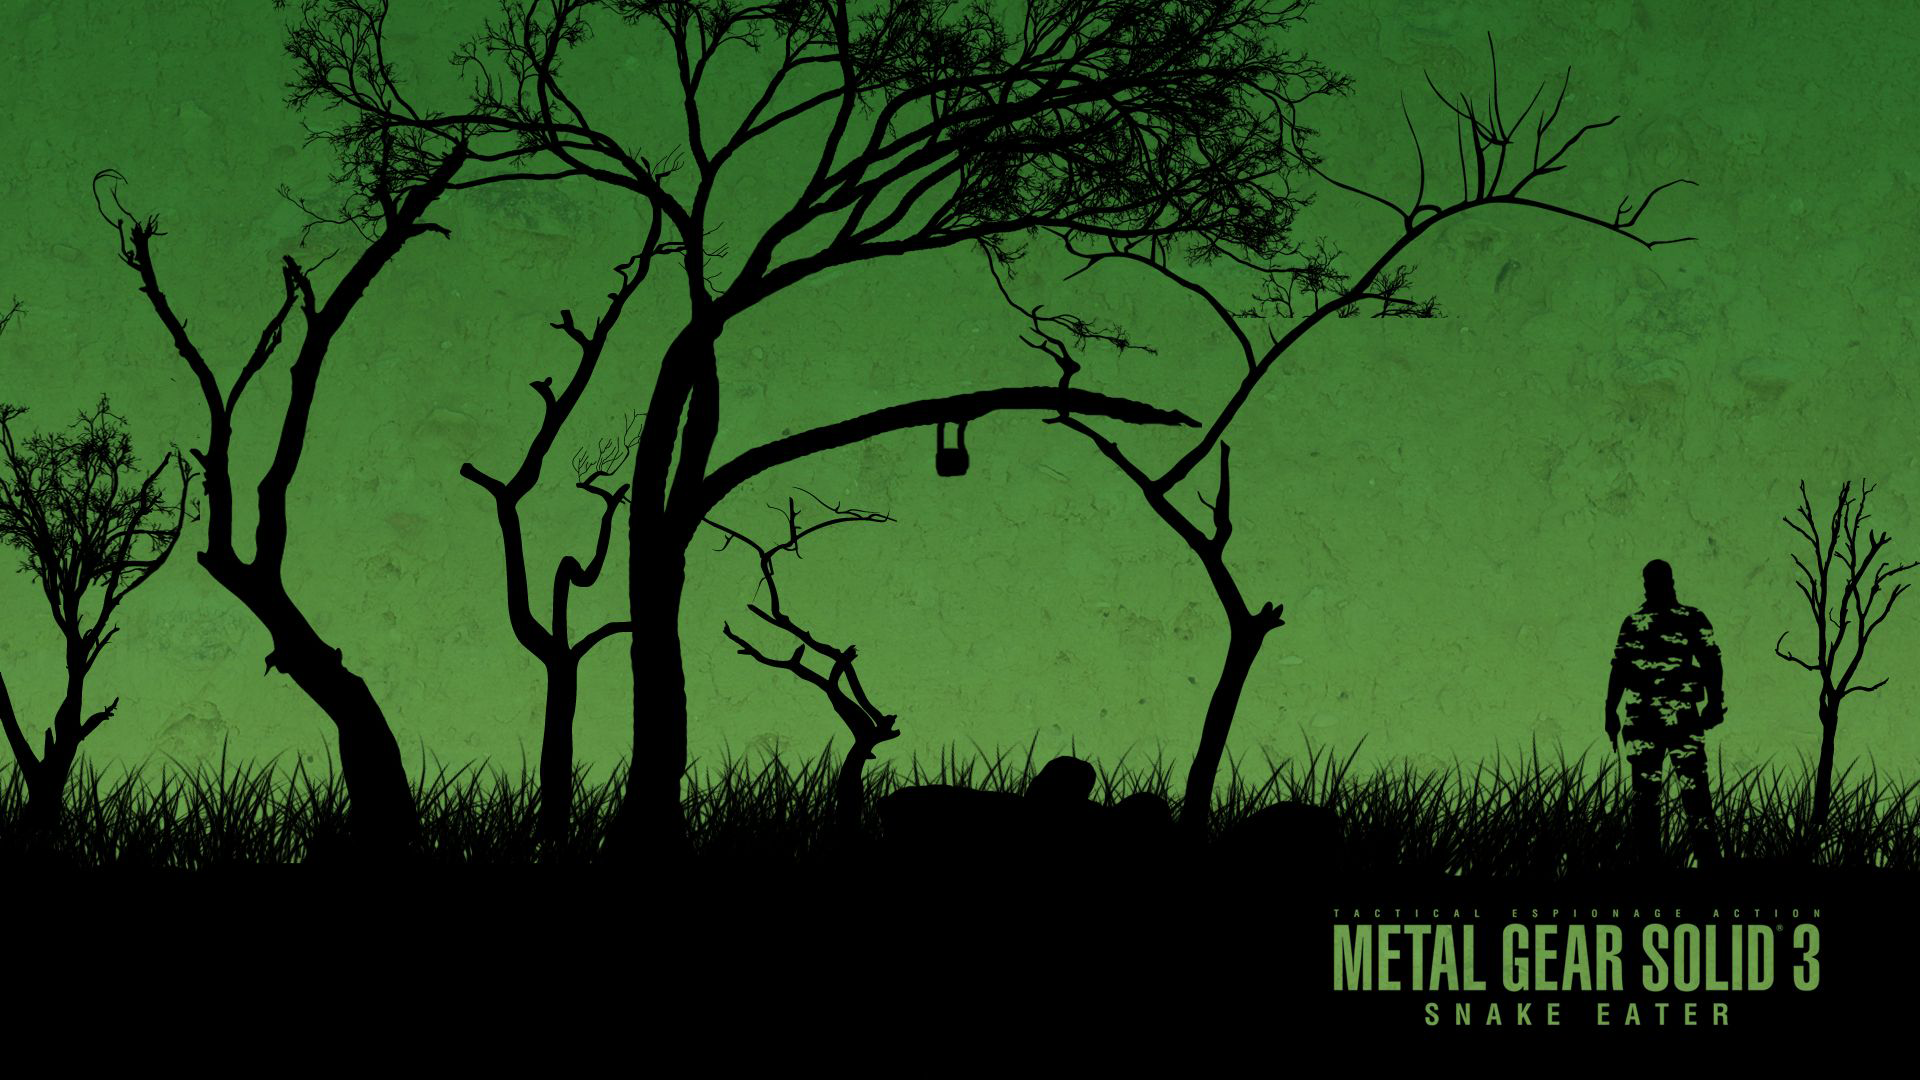 13 Metal Gear Solid 3: Snake Eater HD Wallpapers | Backgrounds ...